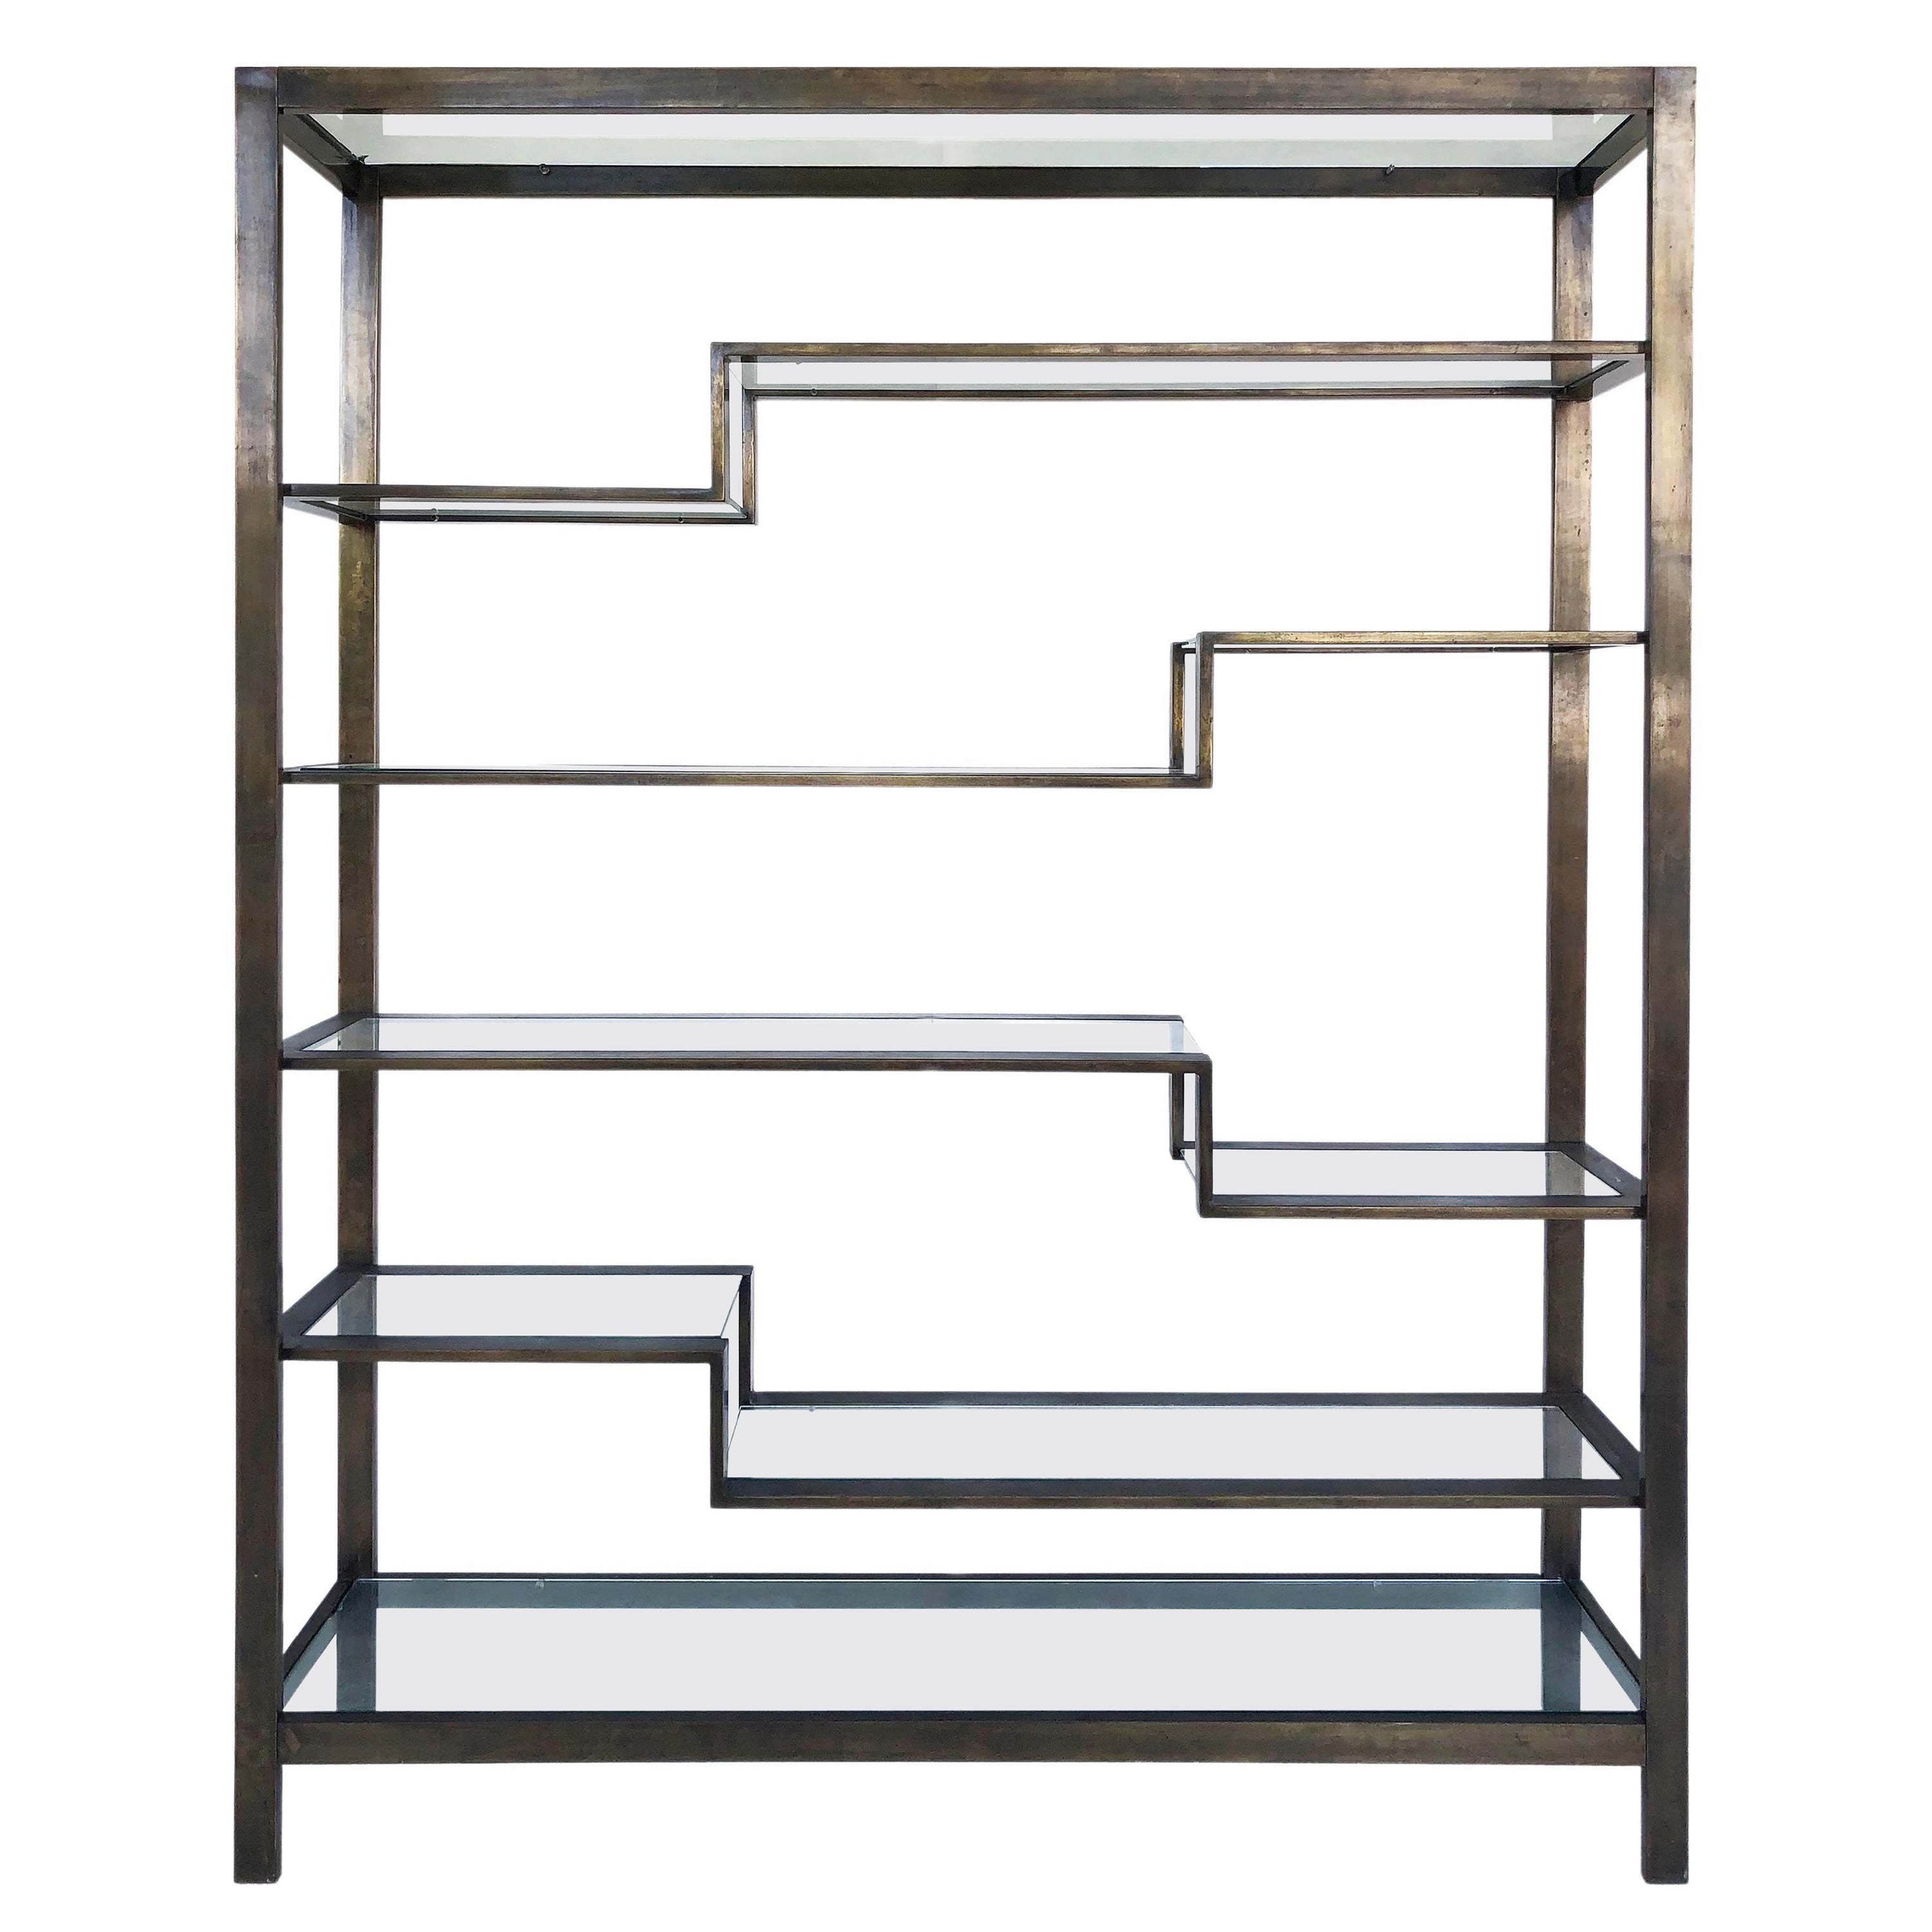 Bronzed Finish Mid-Century Modern Etagere Metal Shelving with Glass Shelves